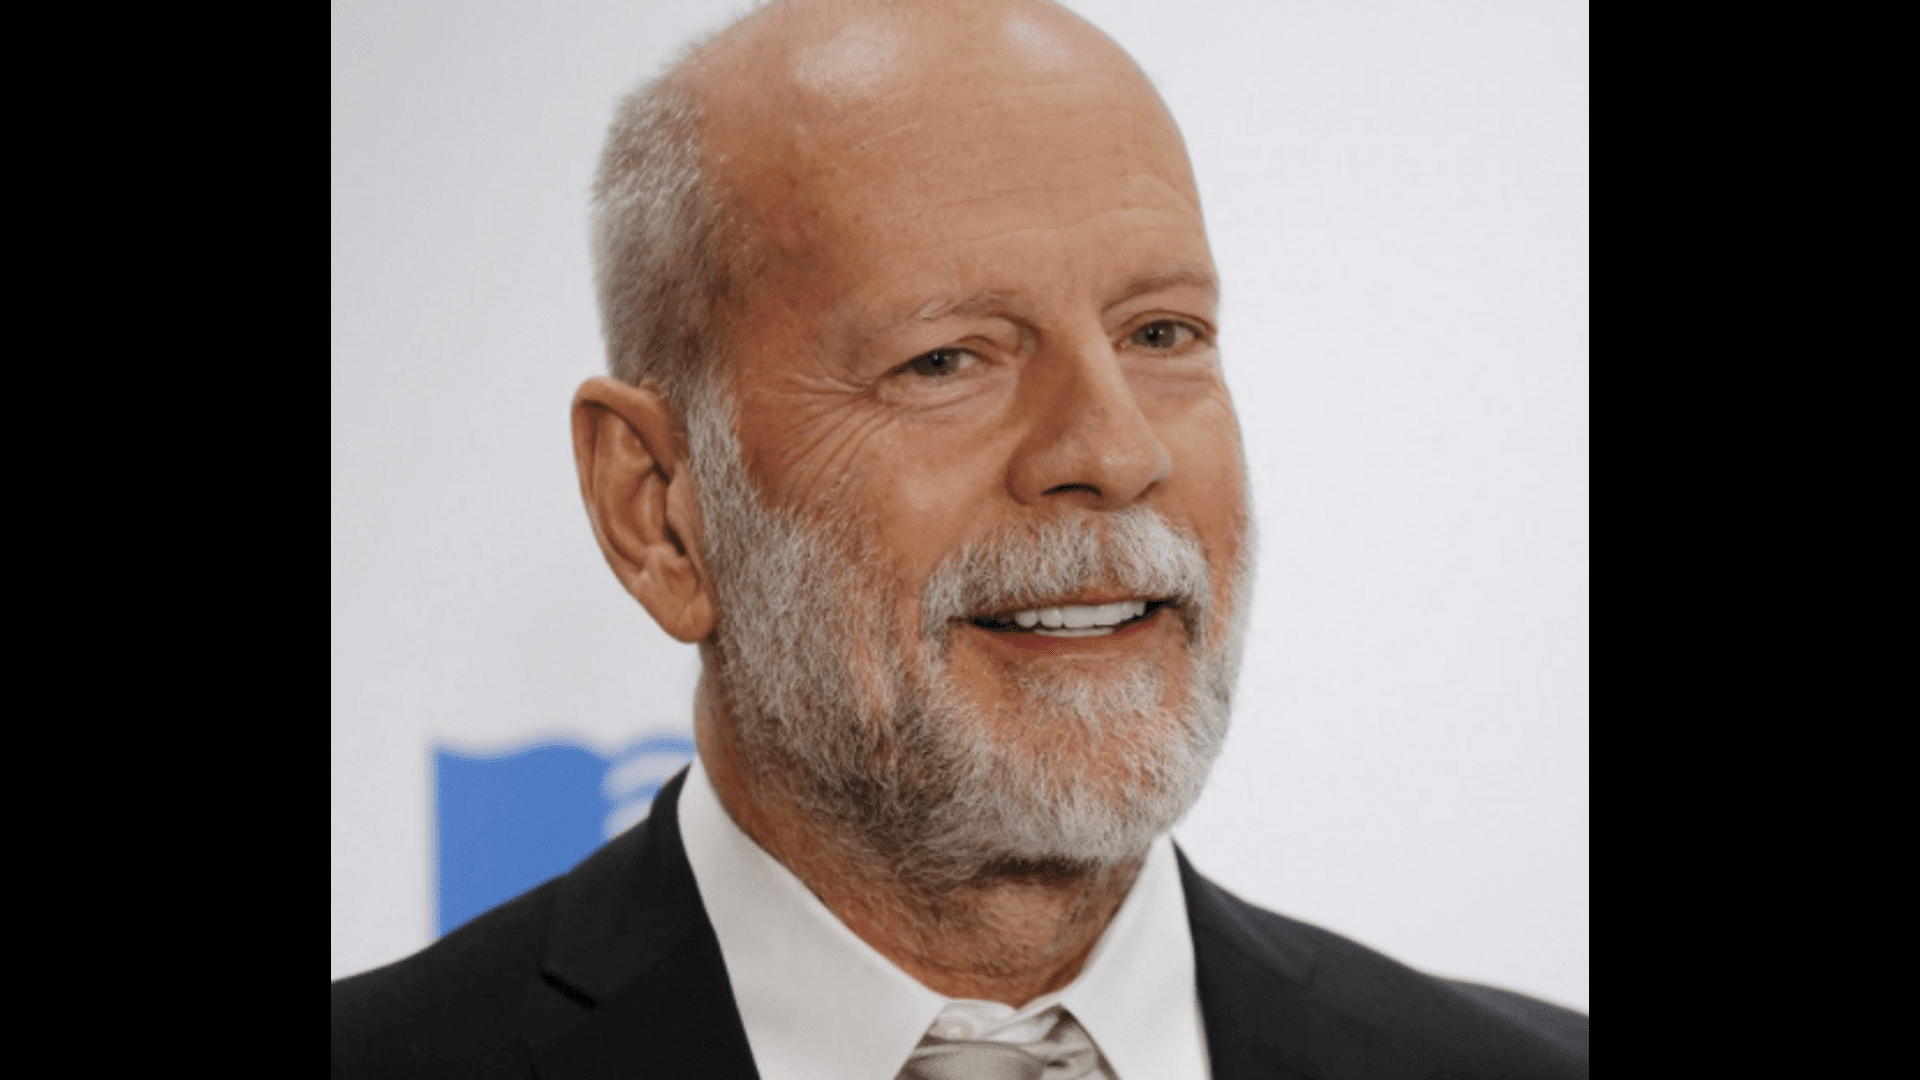 Hollywood reacts to Bruce Willis' retirement due to illness